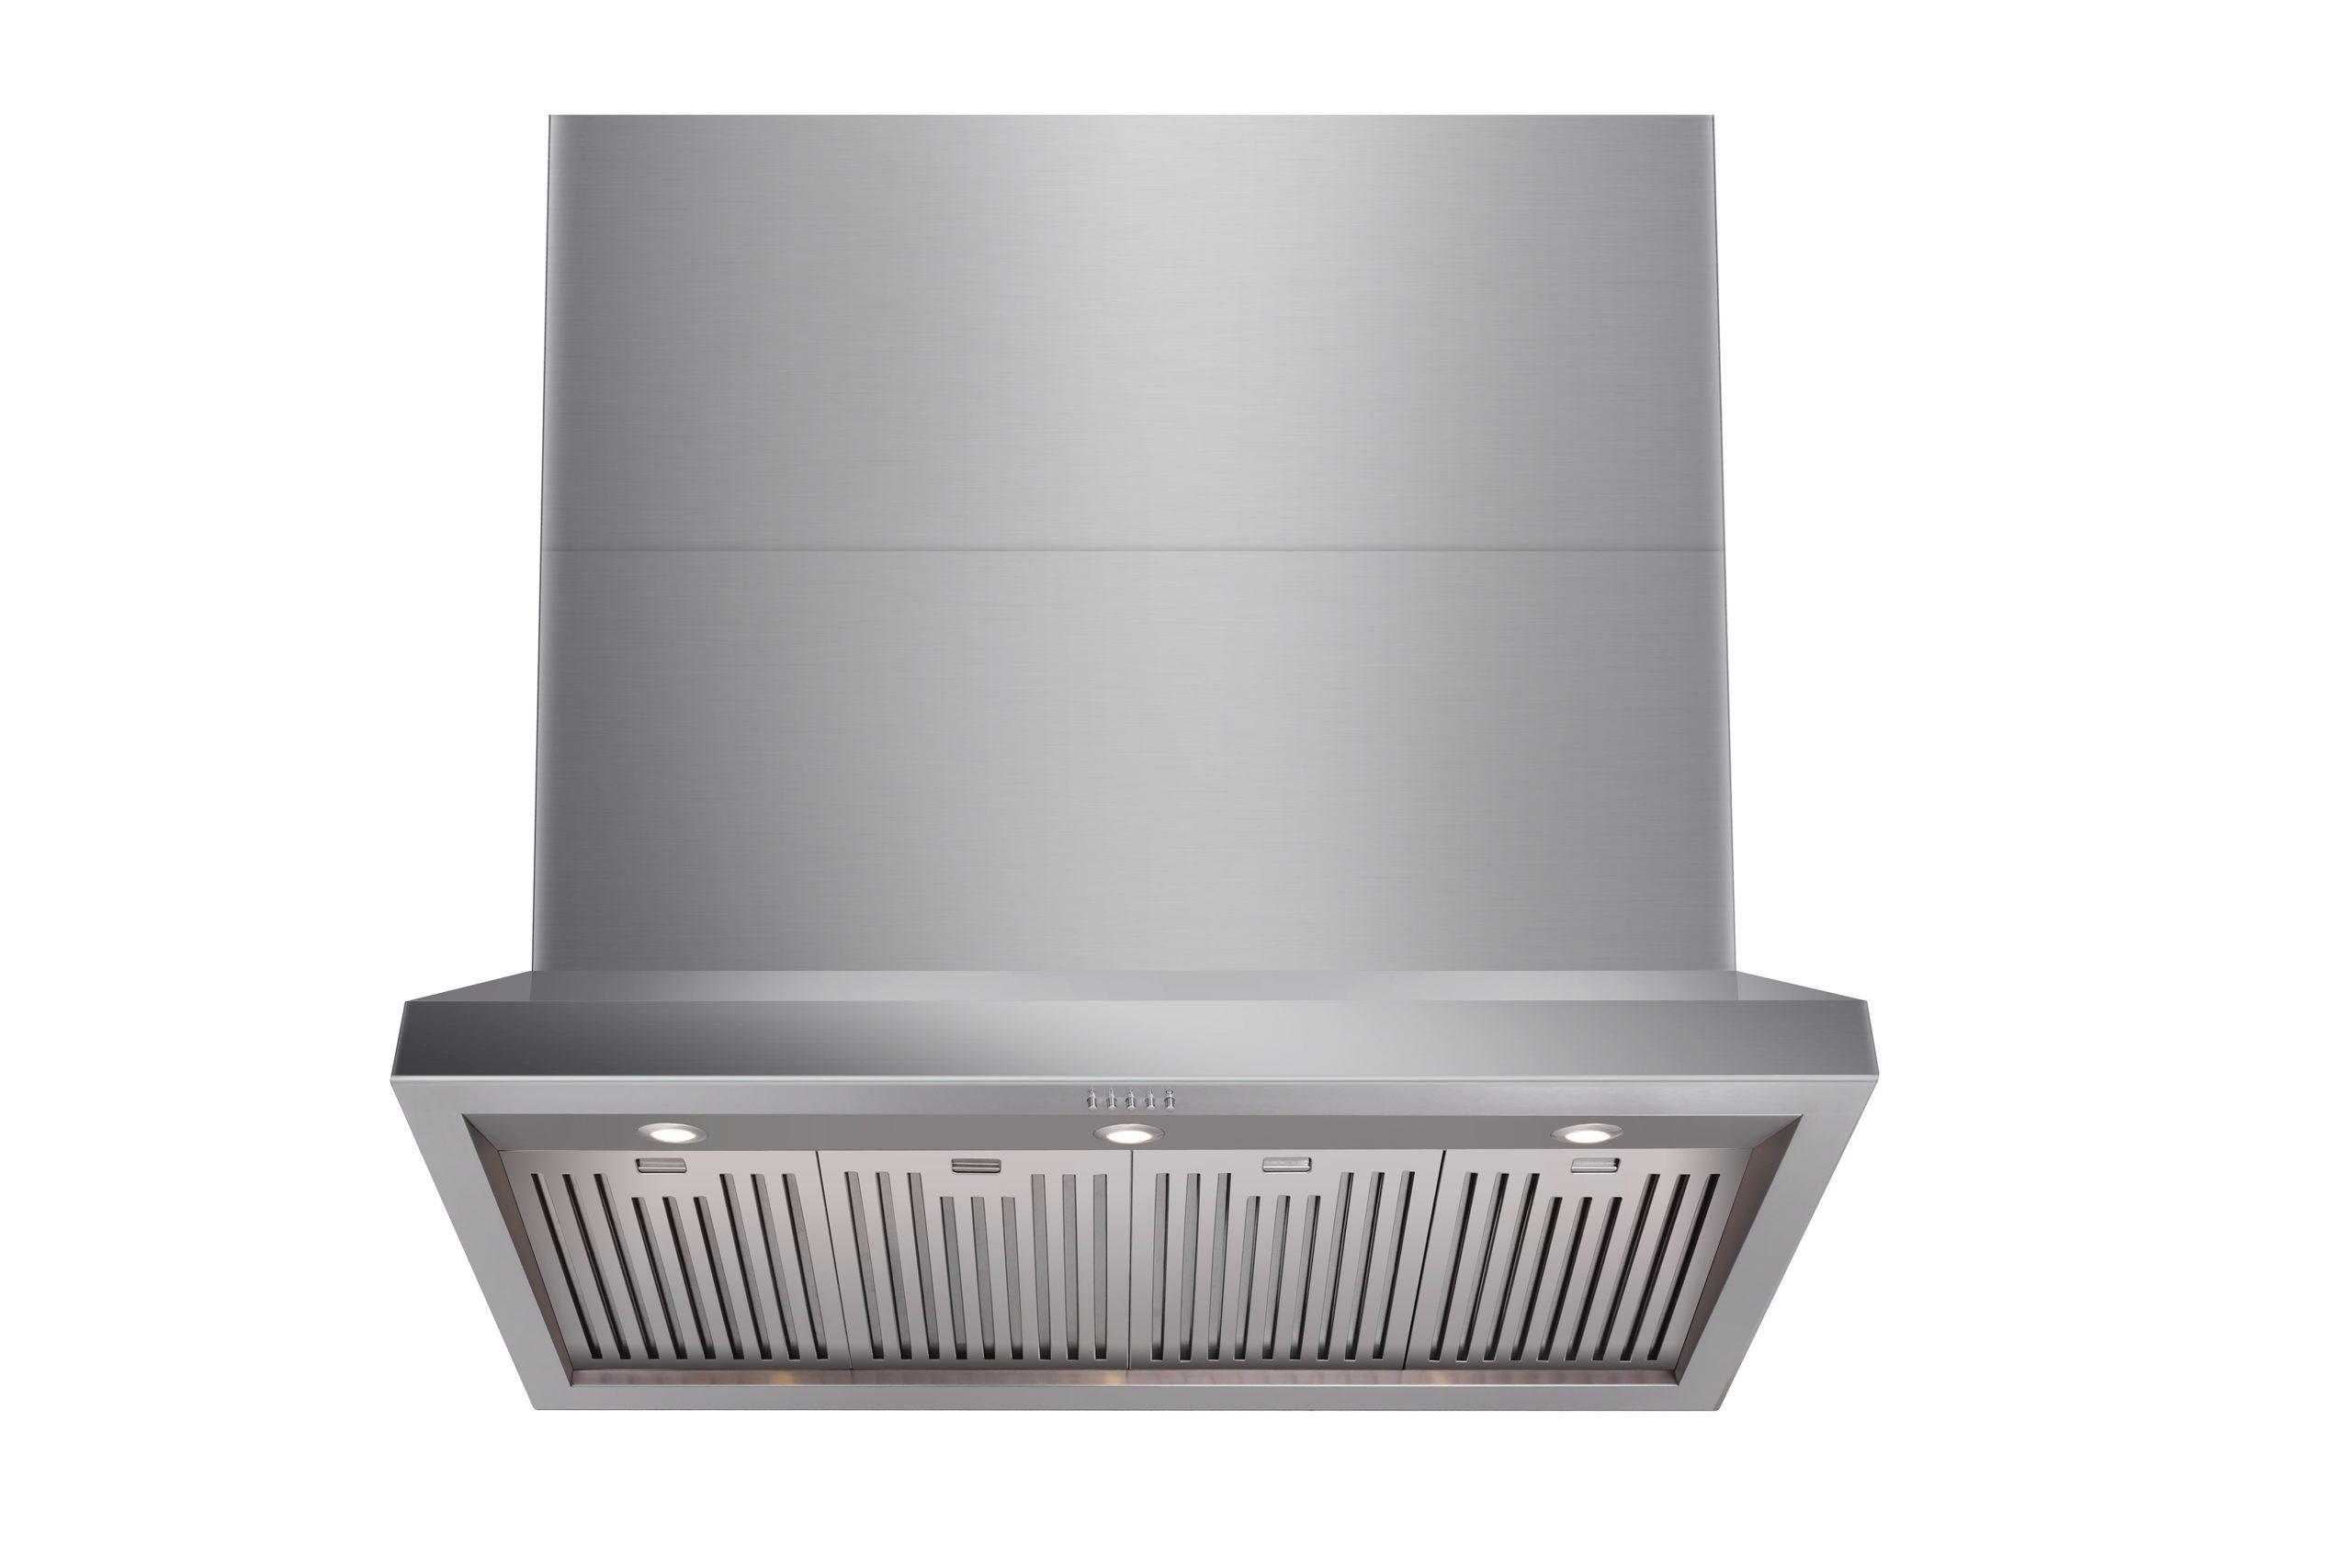 Thor Kitchen 48 Inch Professional Range Hood, 11 Inches Tall In Stainless Steel (duct Cover Sold Separately) - Trh4806